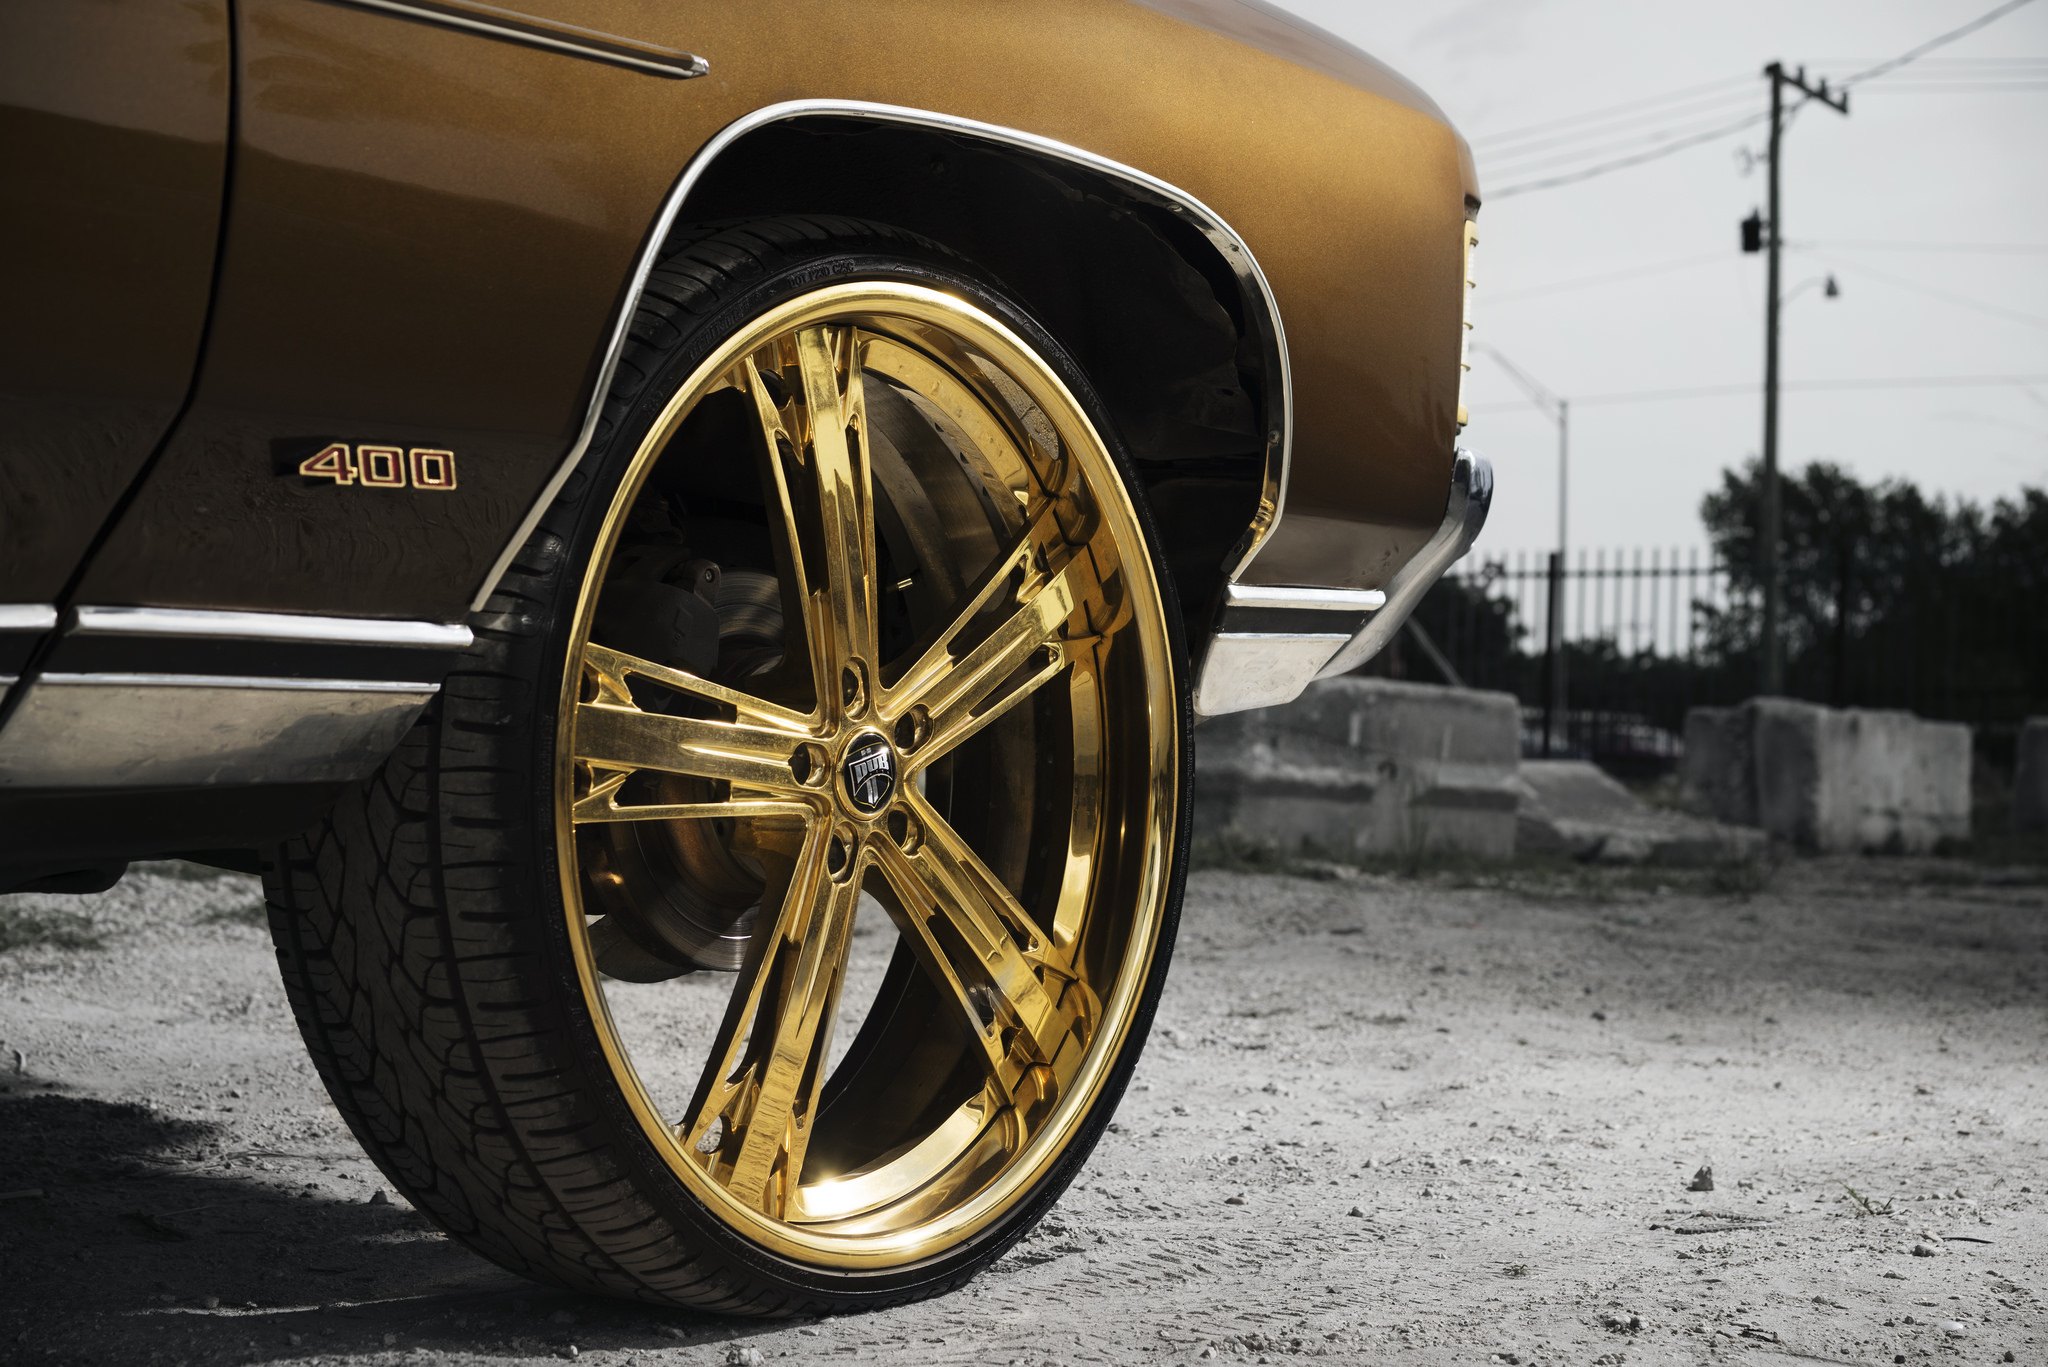 Chevy Impala 400 with Custom Gold DUB Rims - Photo by Jordan Donnelly